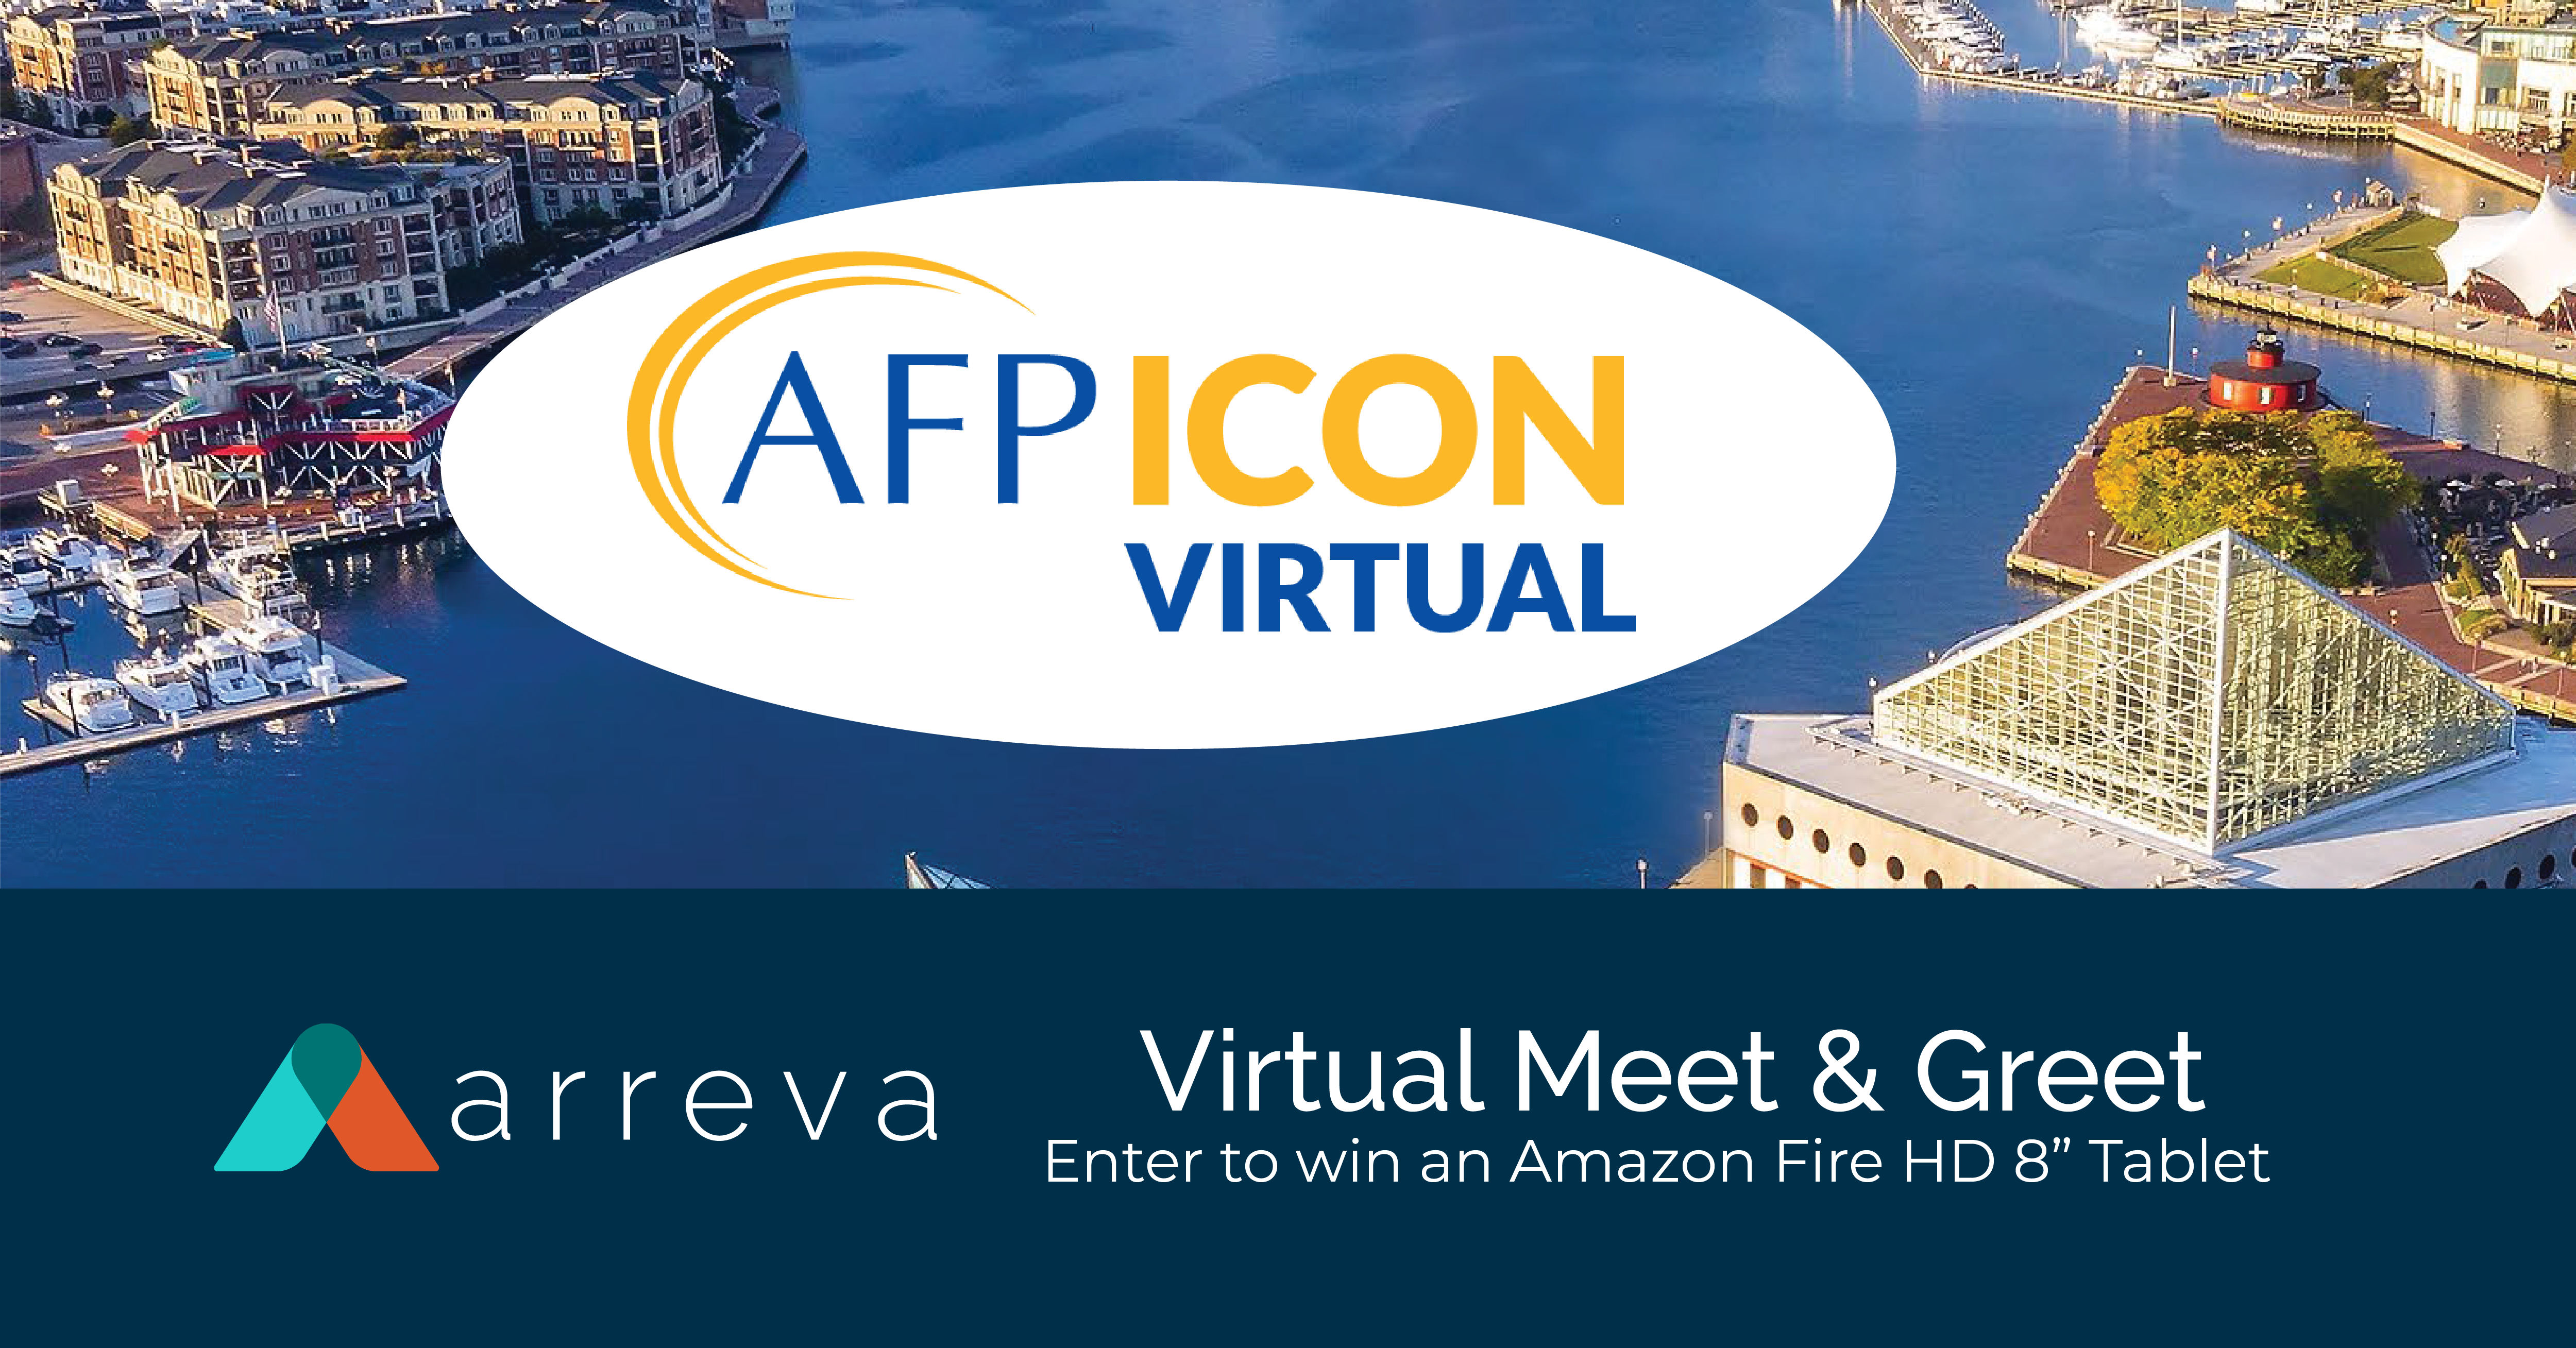 Visit us at AFP Icon Virtual and Enter to Win Great Prizes